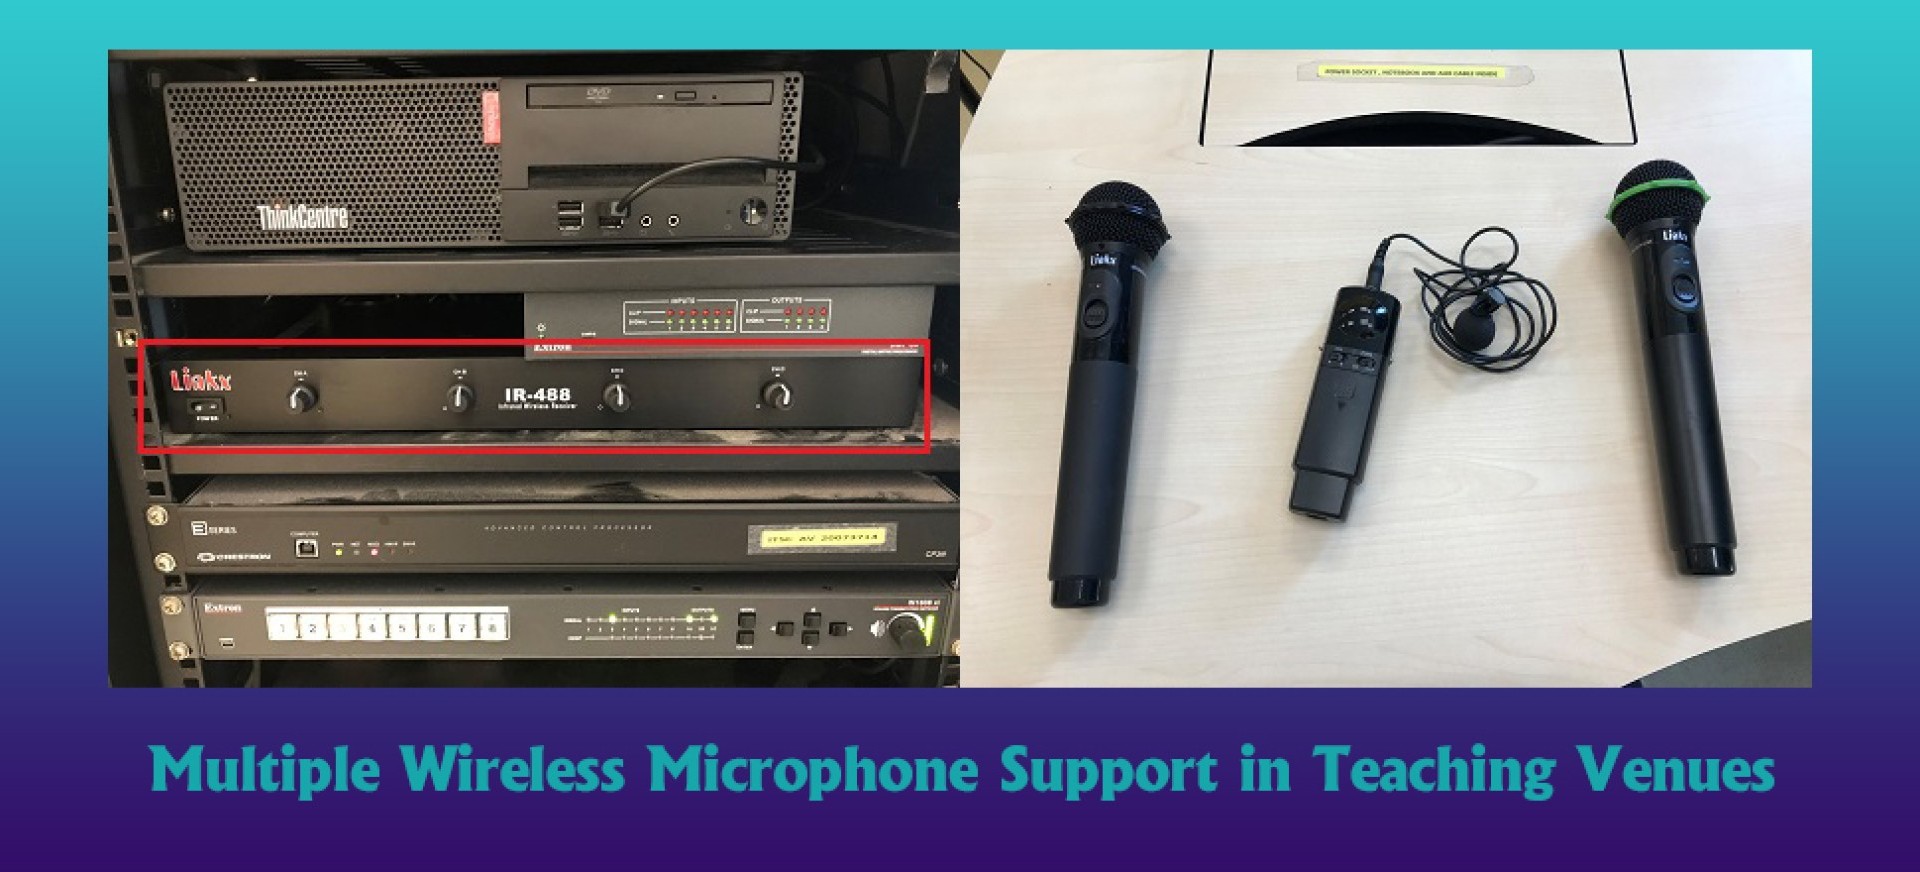 Multiple Wireless Microphone Support in Teaching Venues